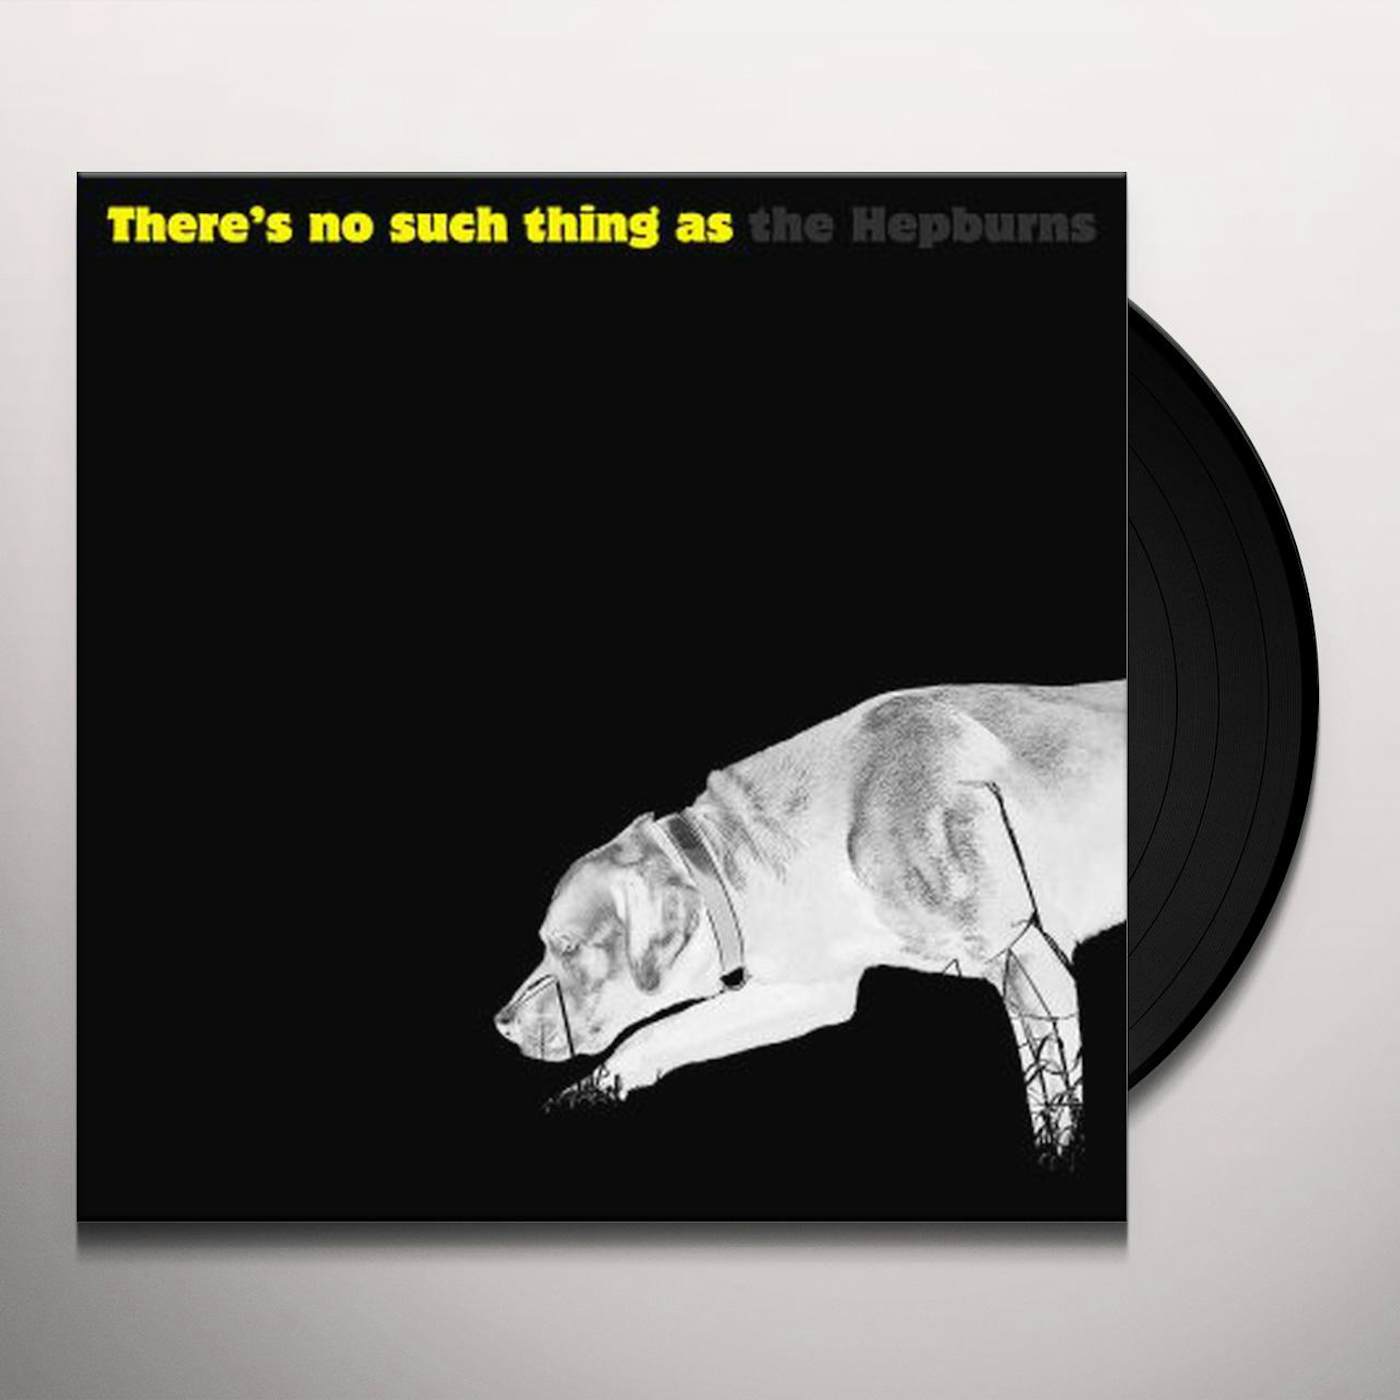 There Is No Such Thing as the Hepburns Vinyl Record